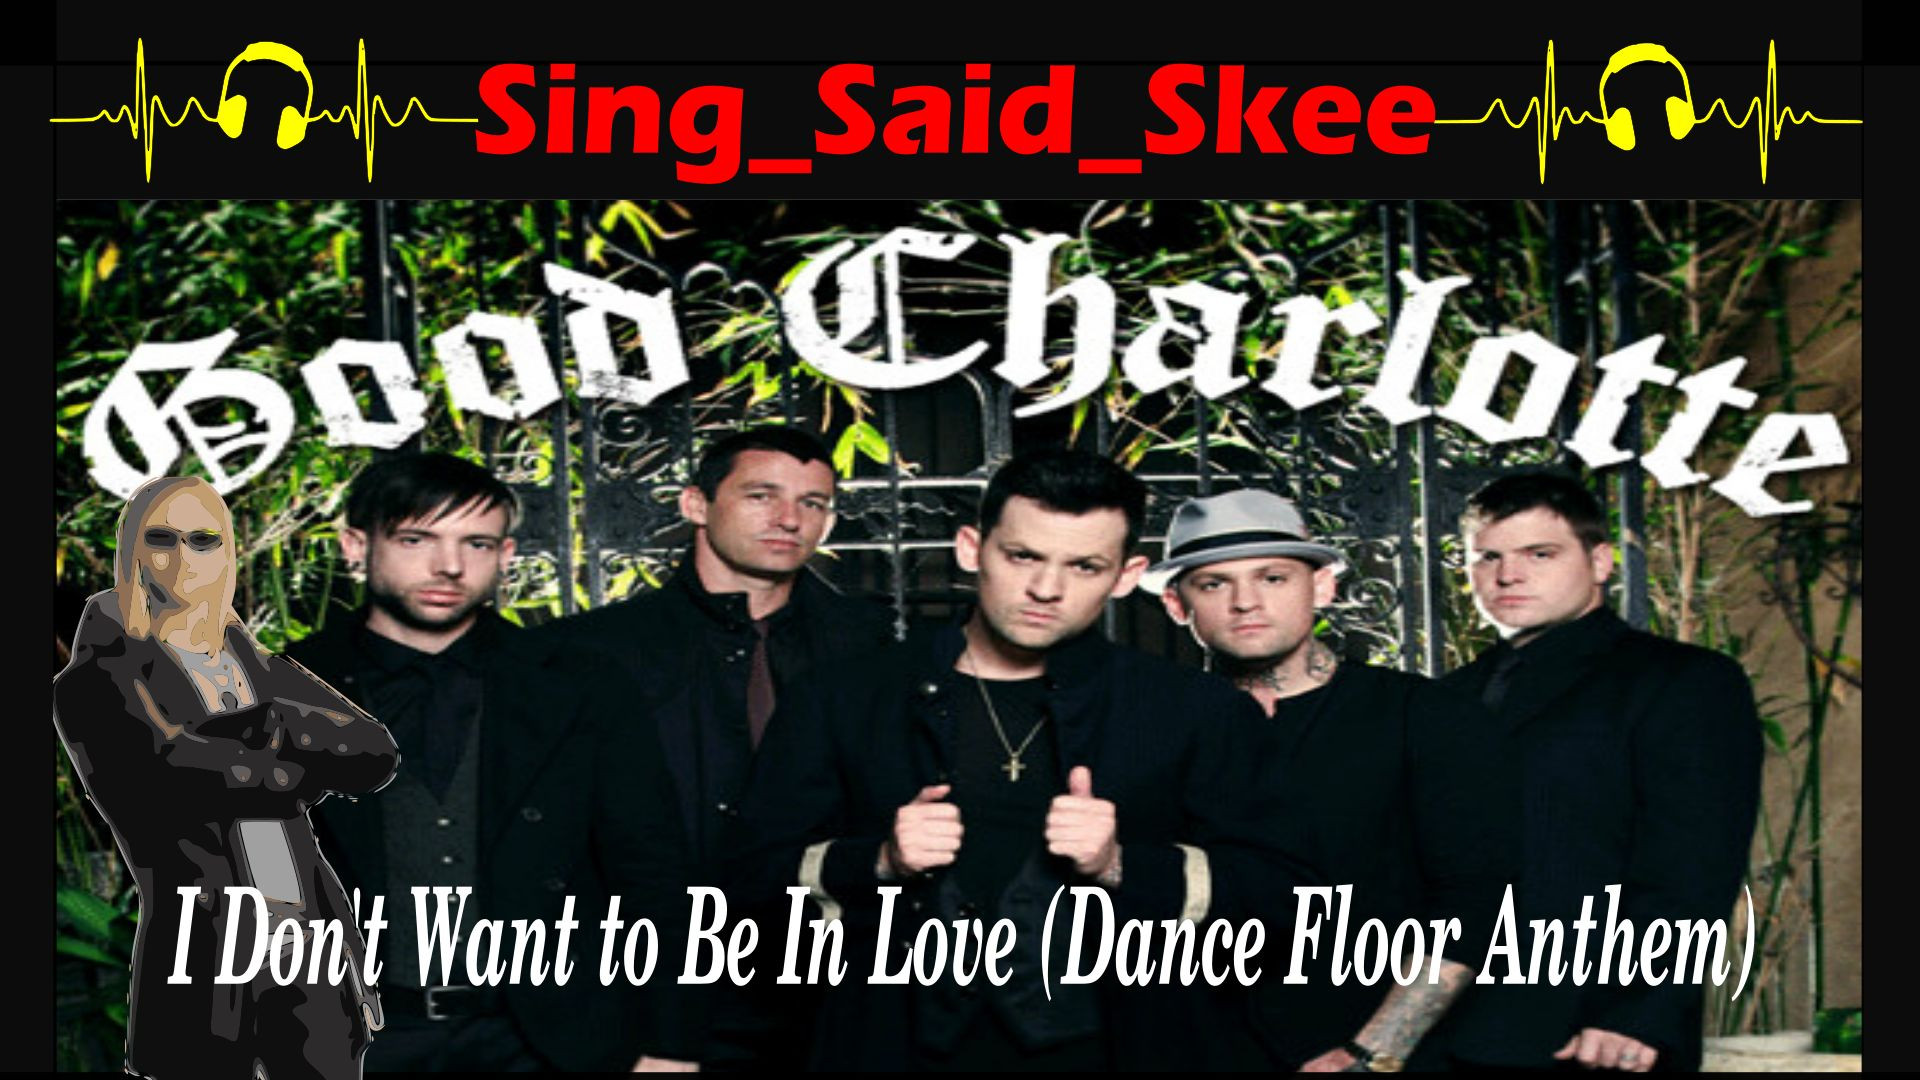 ⁣I Don't Want To Be In Love (Dance Floor Anthem) - Good Charlotte - Sing_Said_Skee